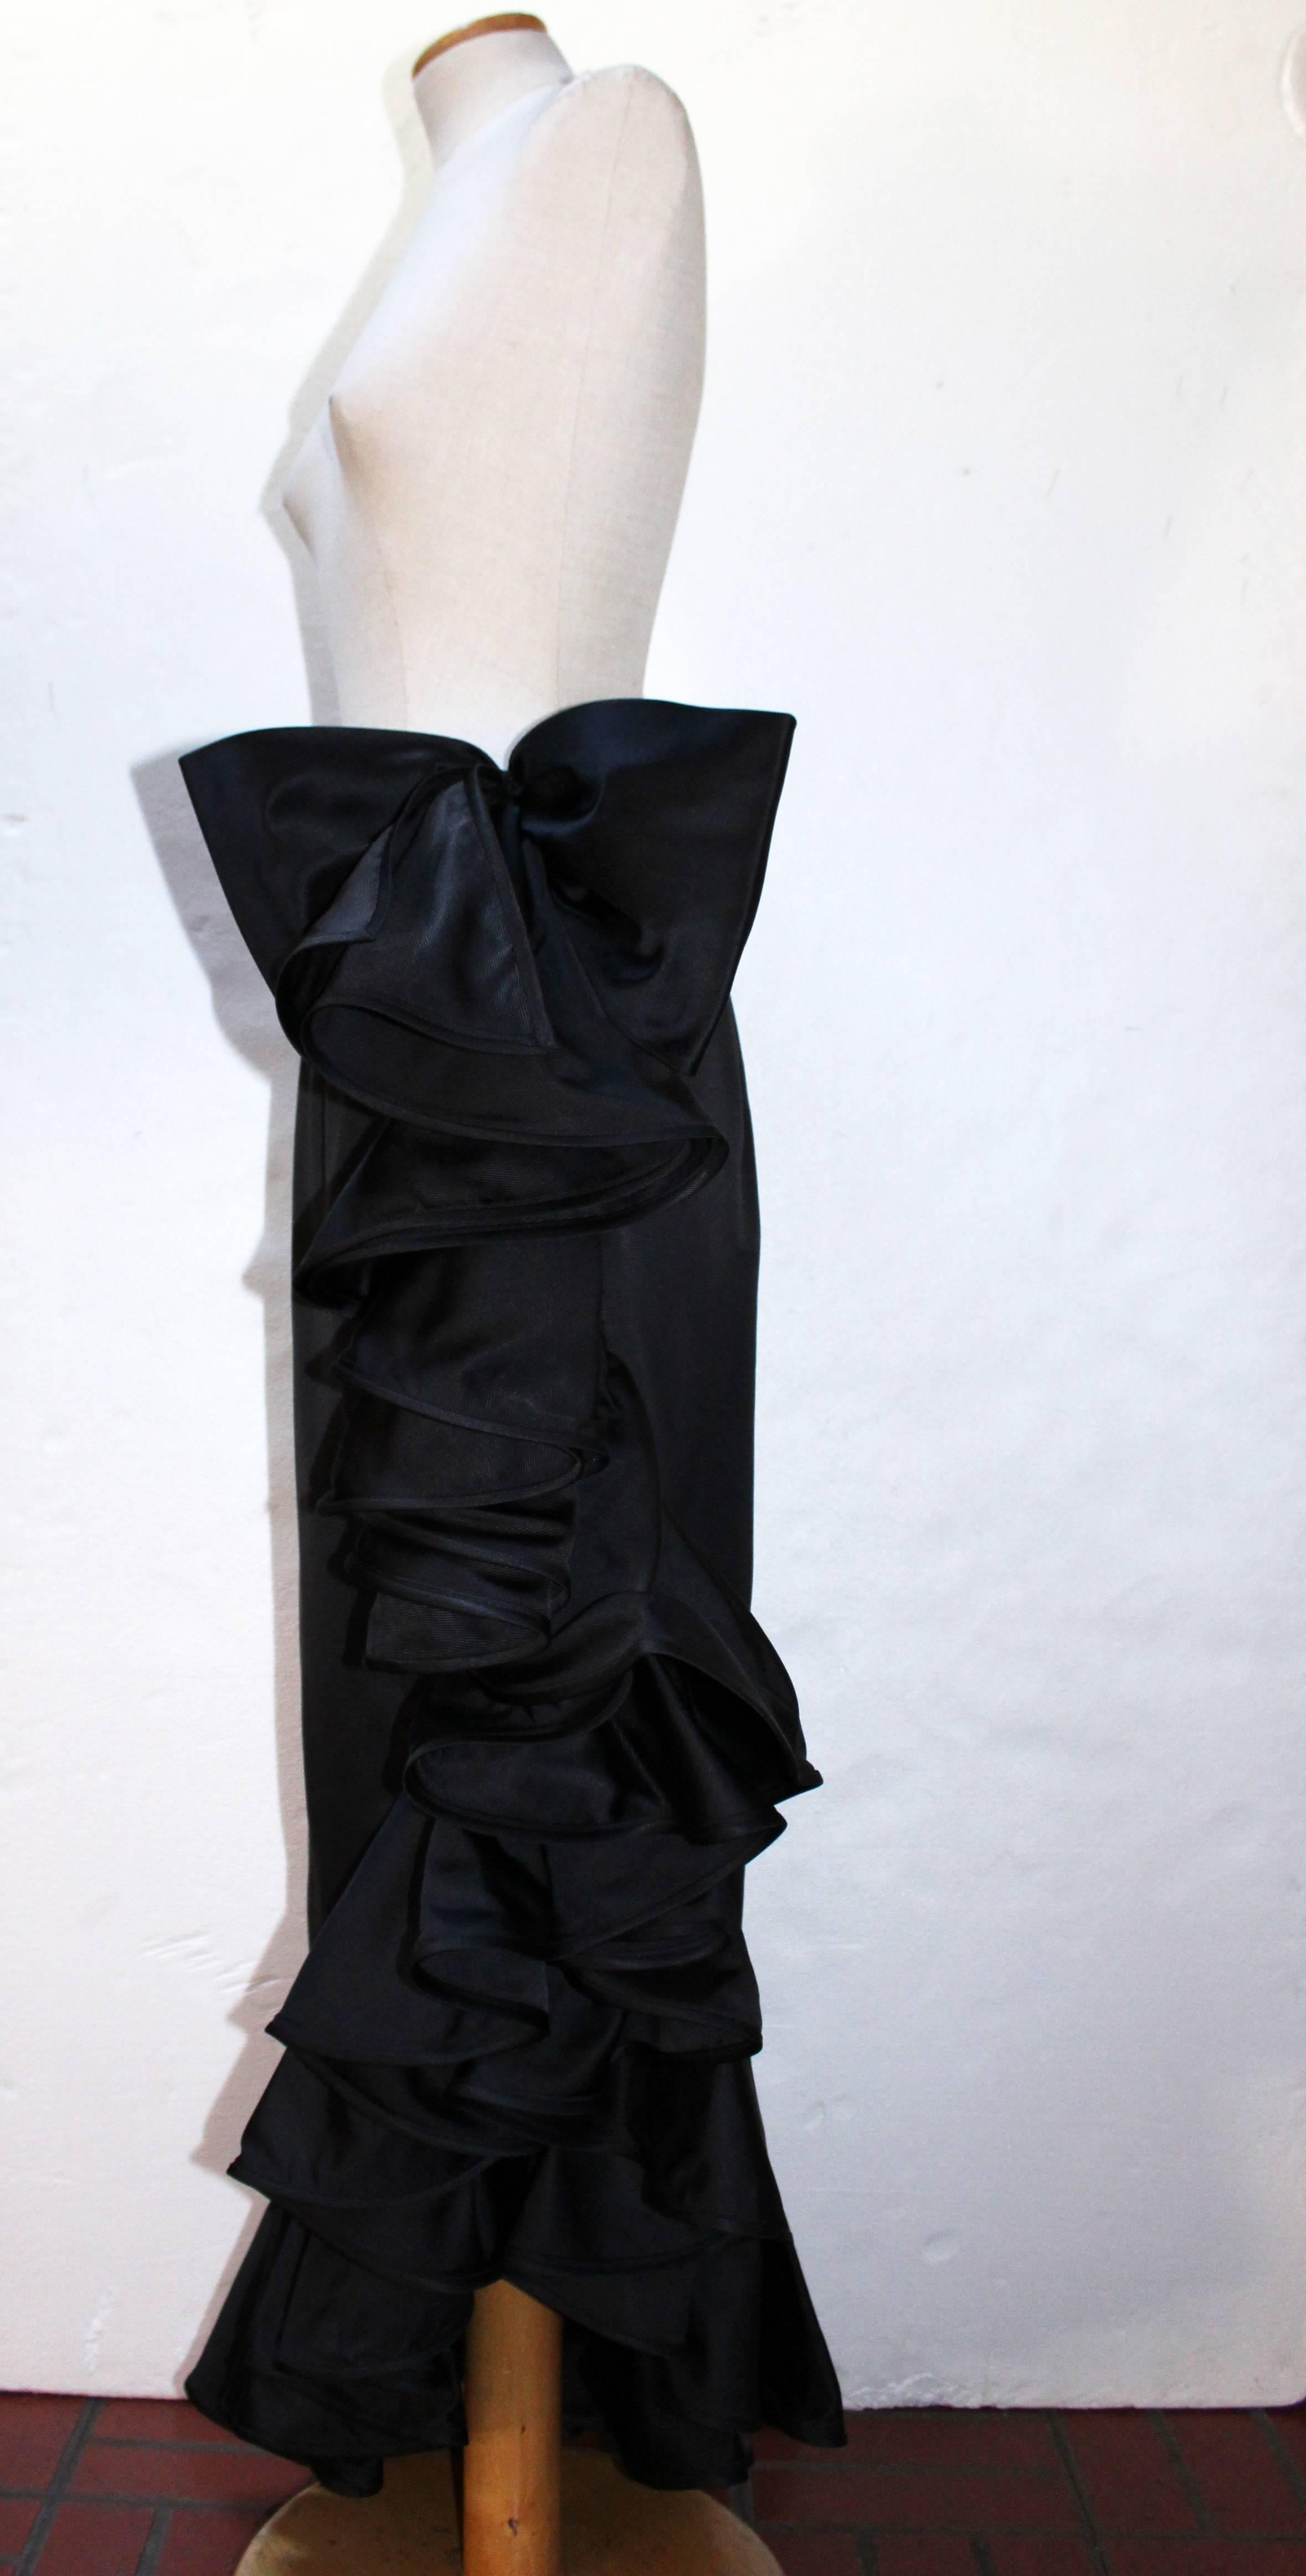 Valentino Night black draped skirt featuring an asymmetric style and a velvet bow belt. Side zipper closure. Fully lined. Silk-blend fabric.
Made in Italy and in excellent conditions. 
Size 42 IT.